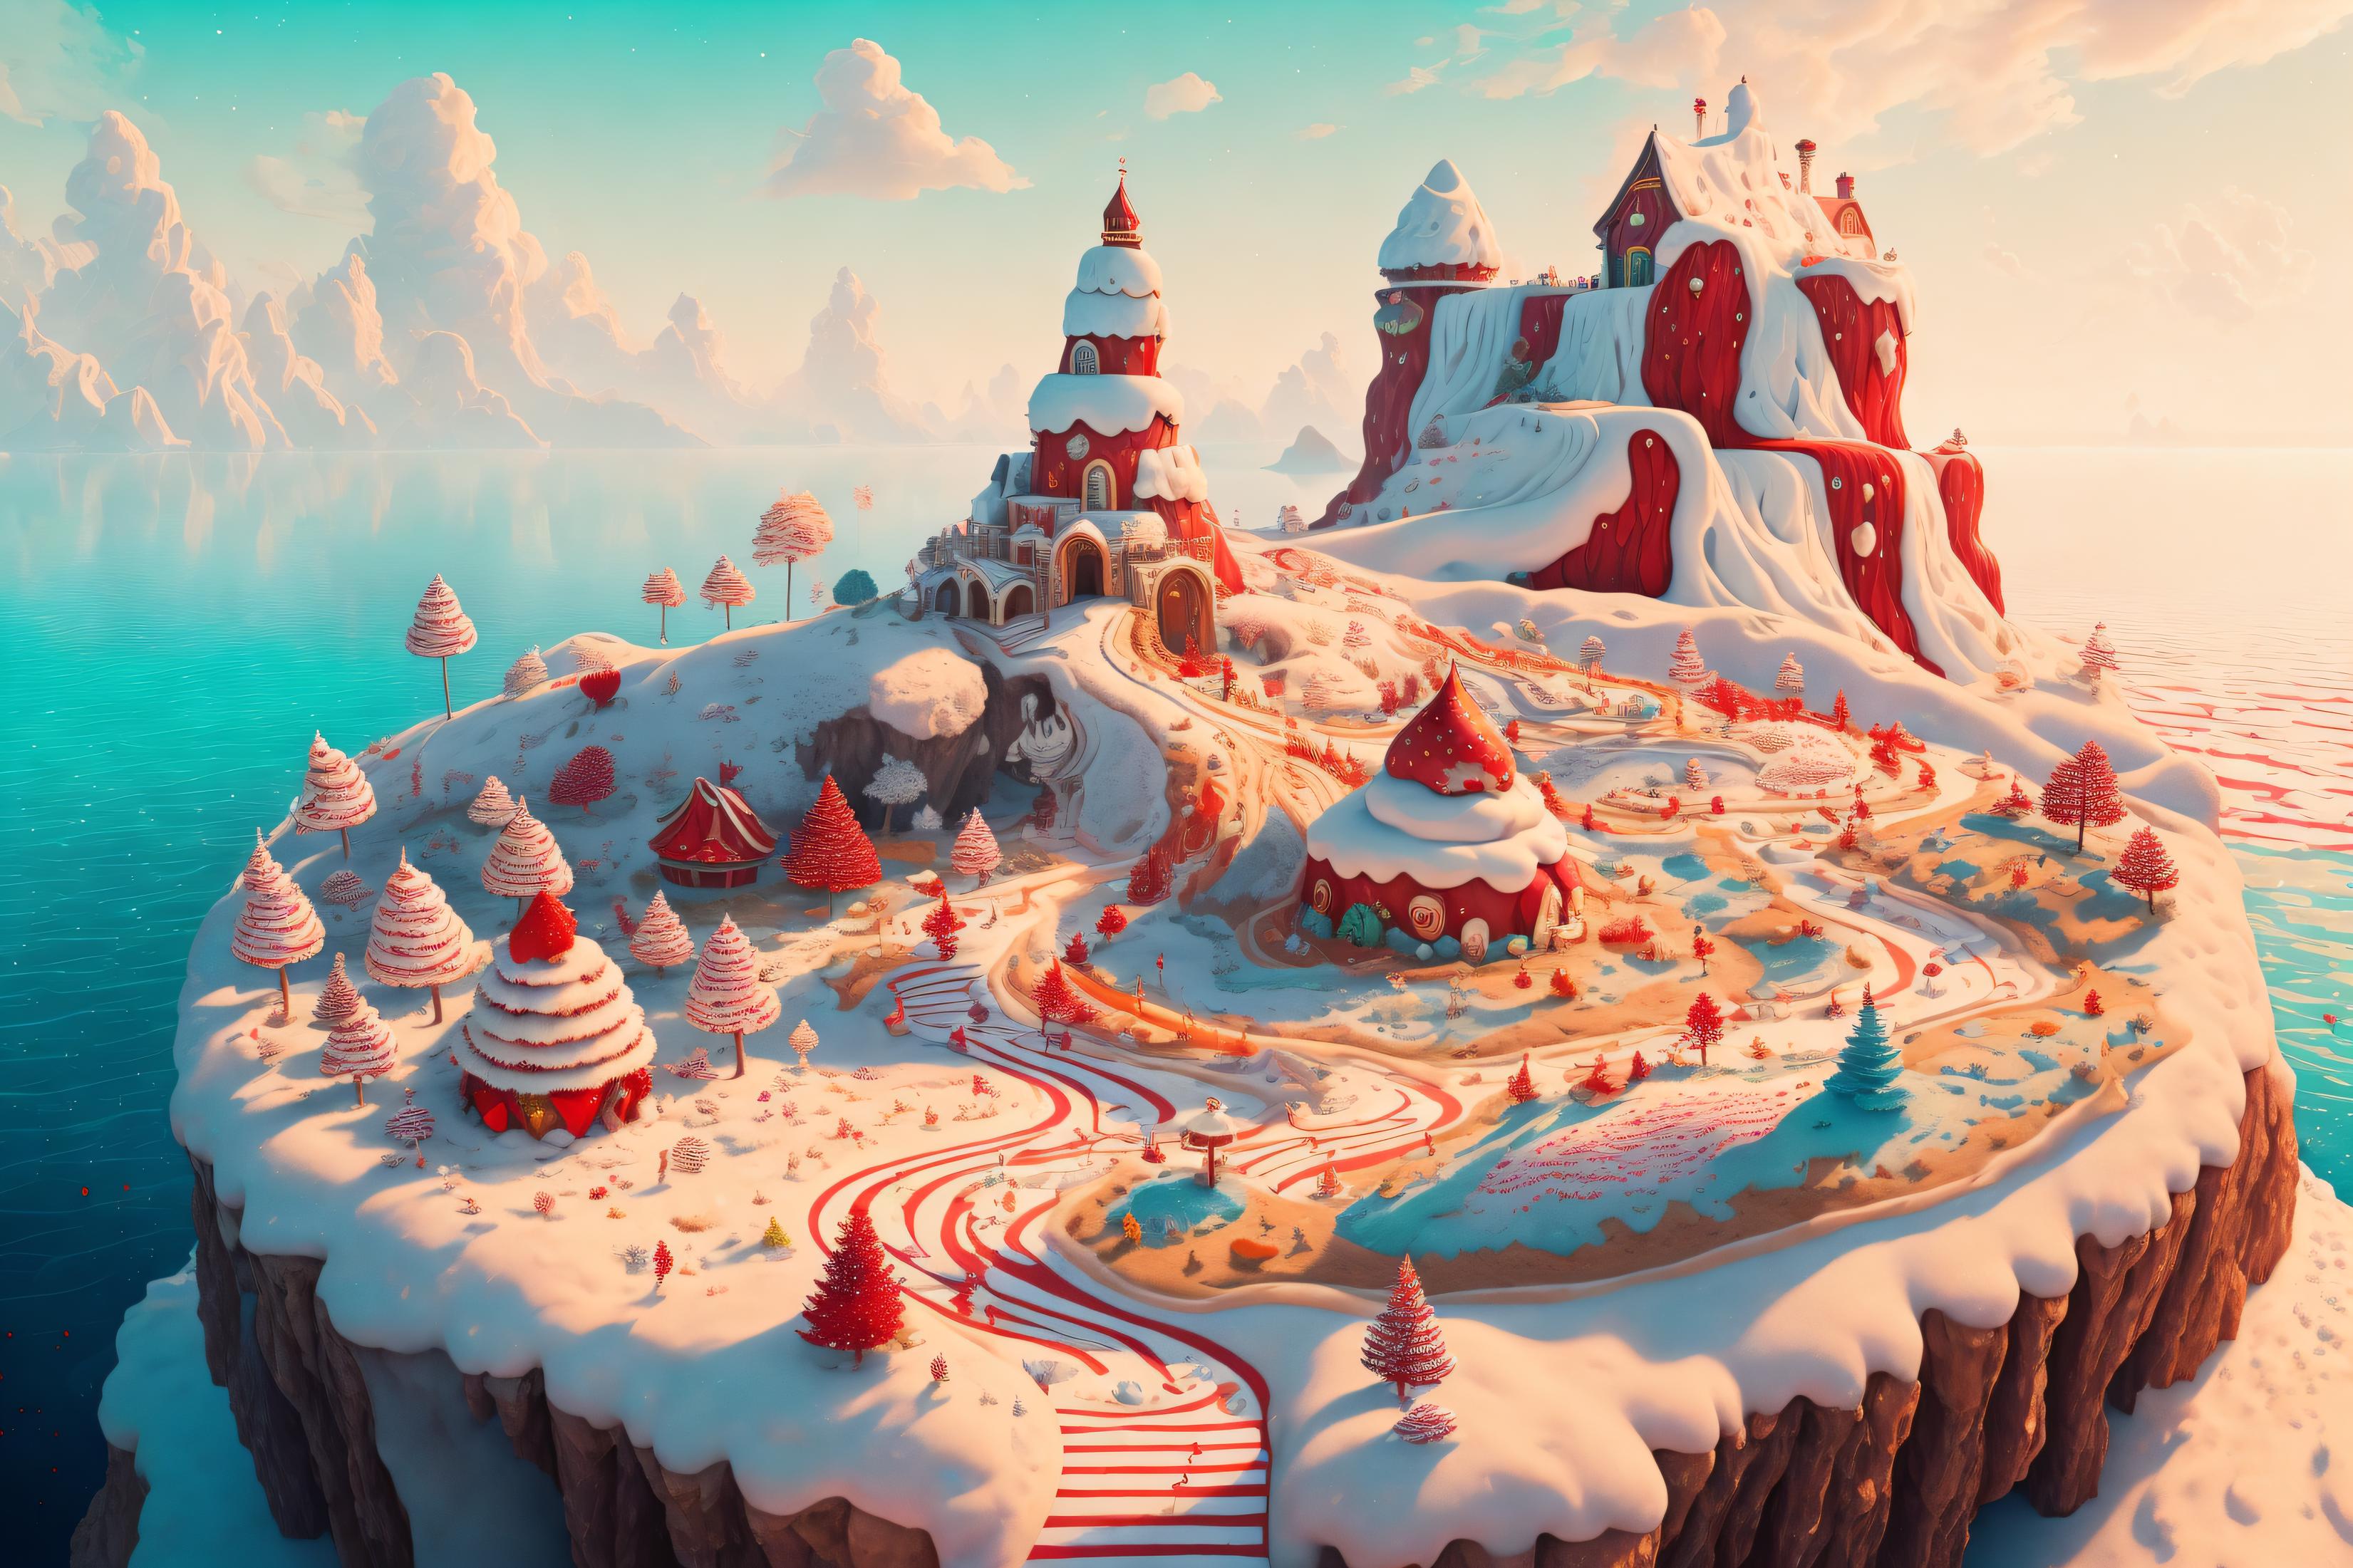 CANDYLAND image by RIXYN